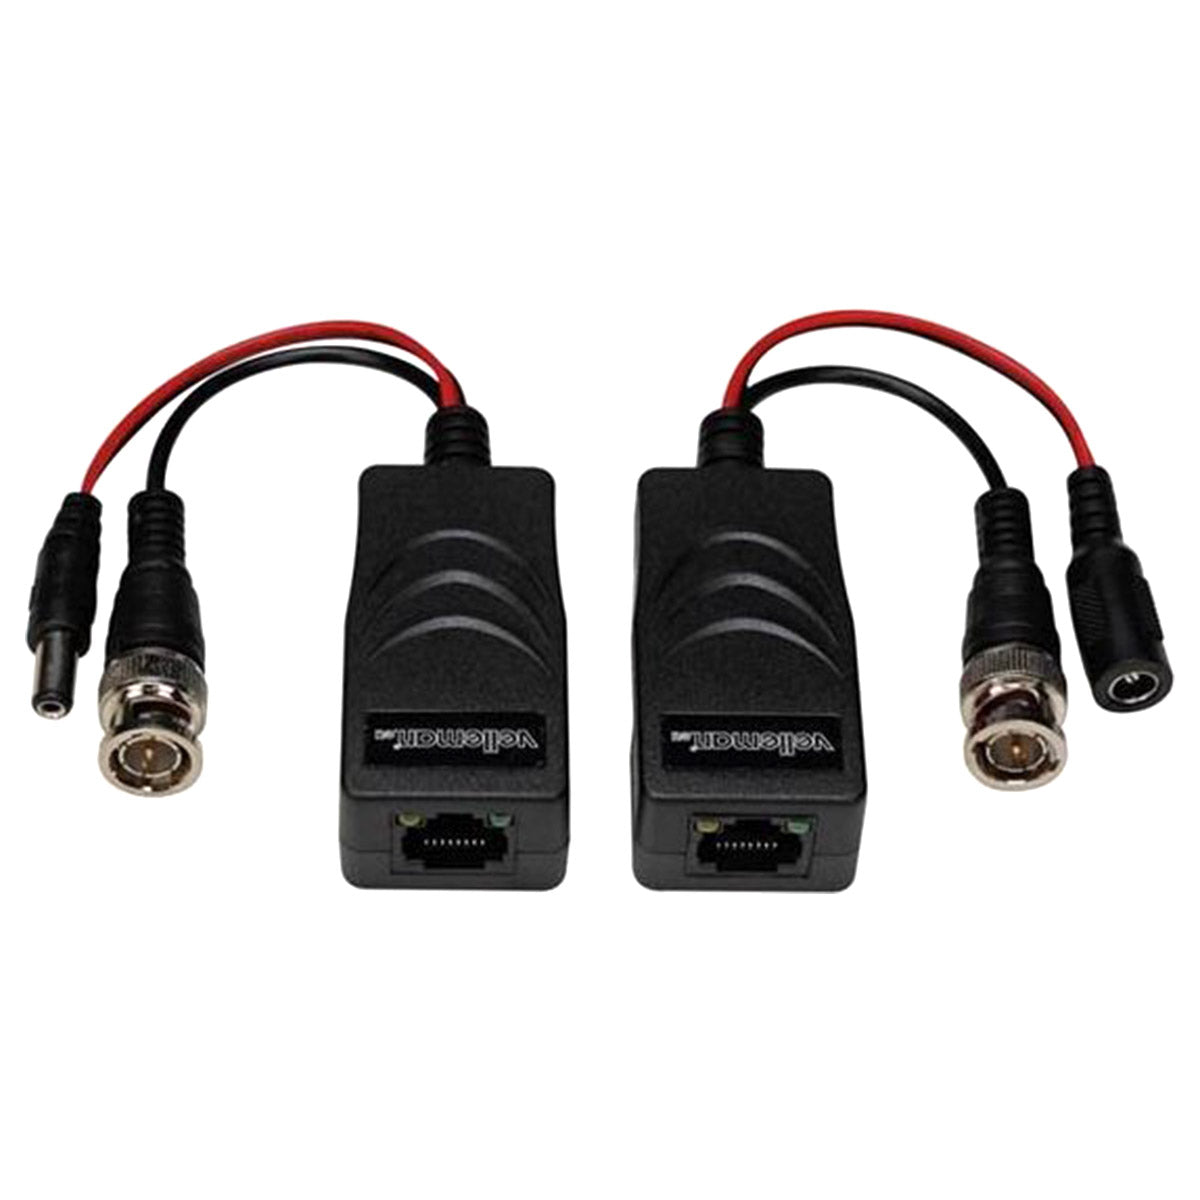 <tc>Ariko</tc> TVI Video/Power Balun with 8P8C (RJ45) connector and BNC/Power cables - Pair